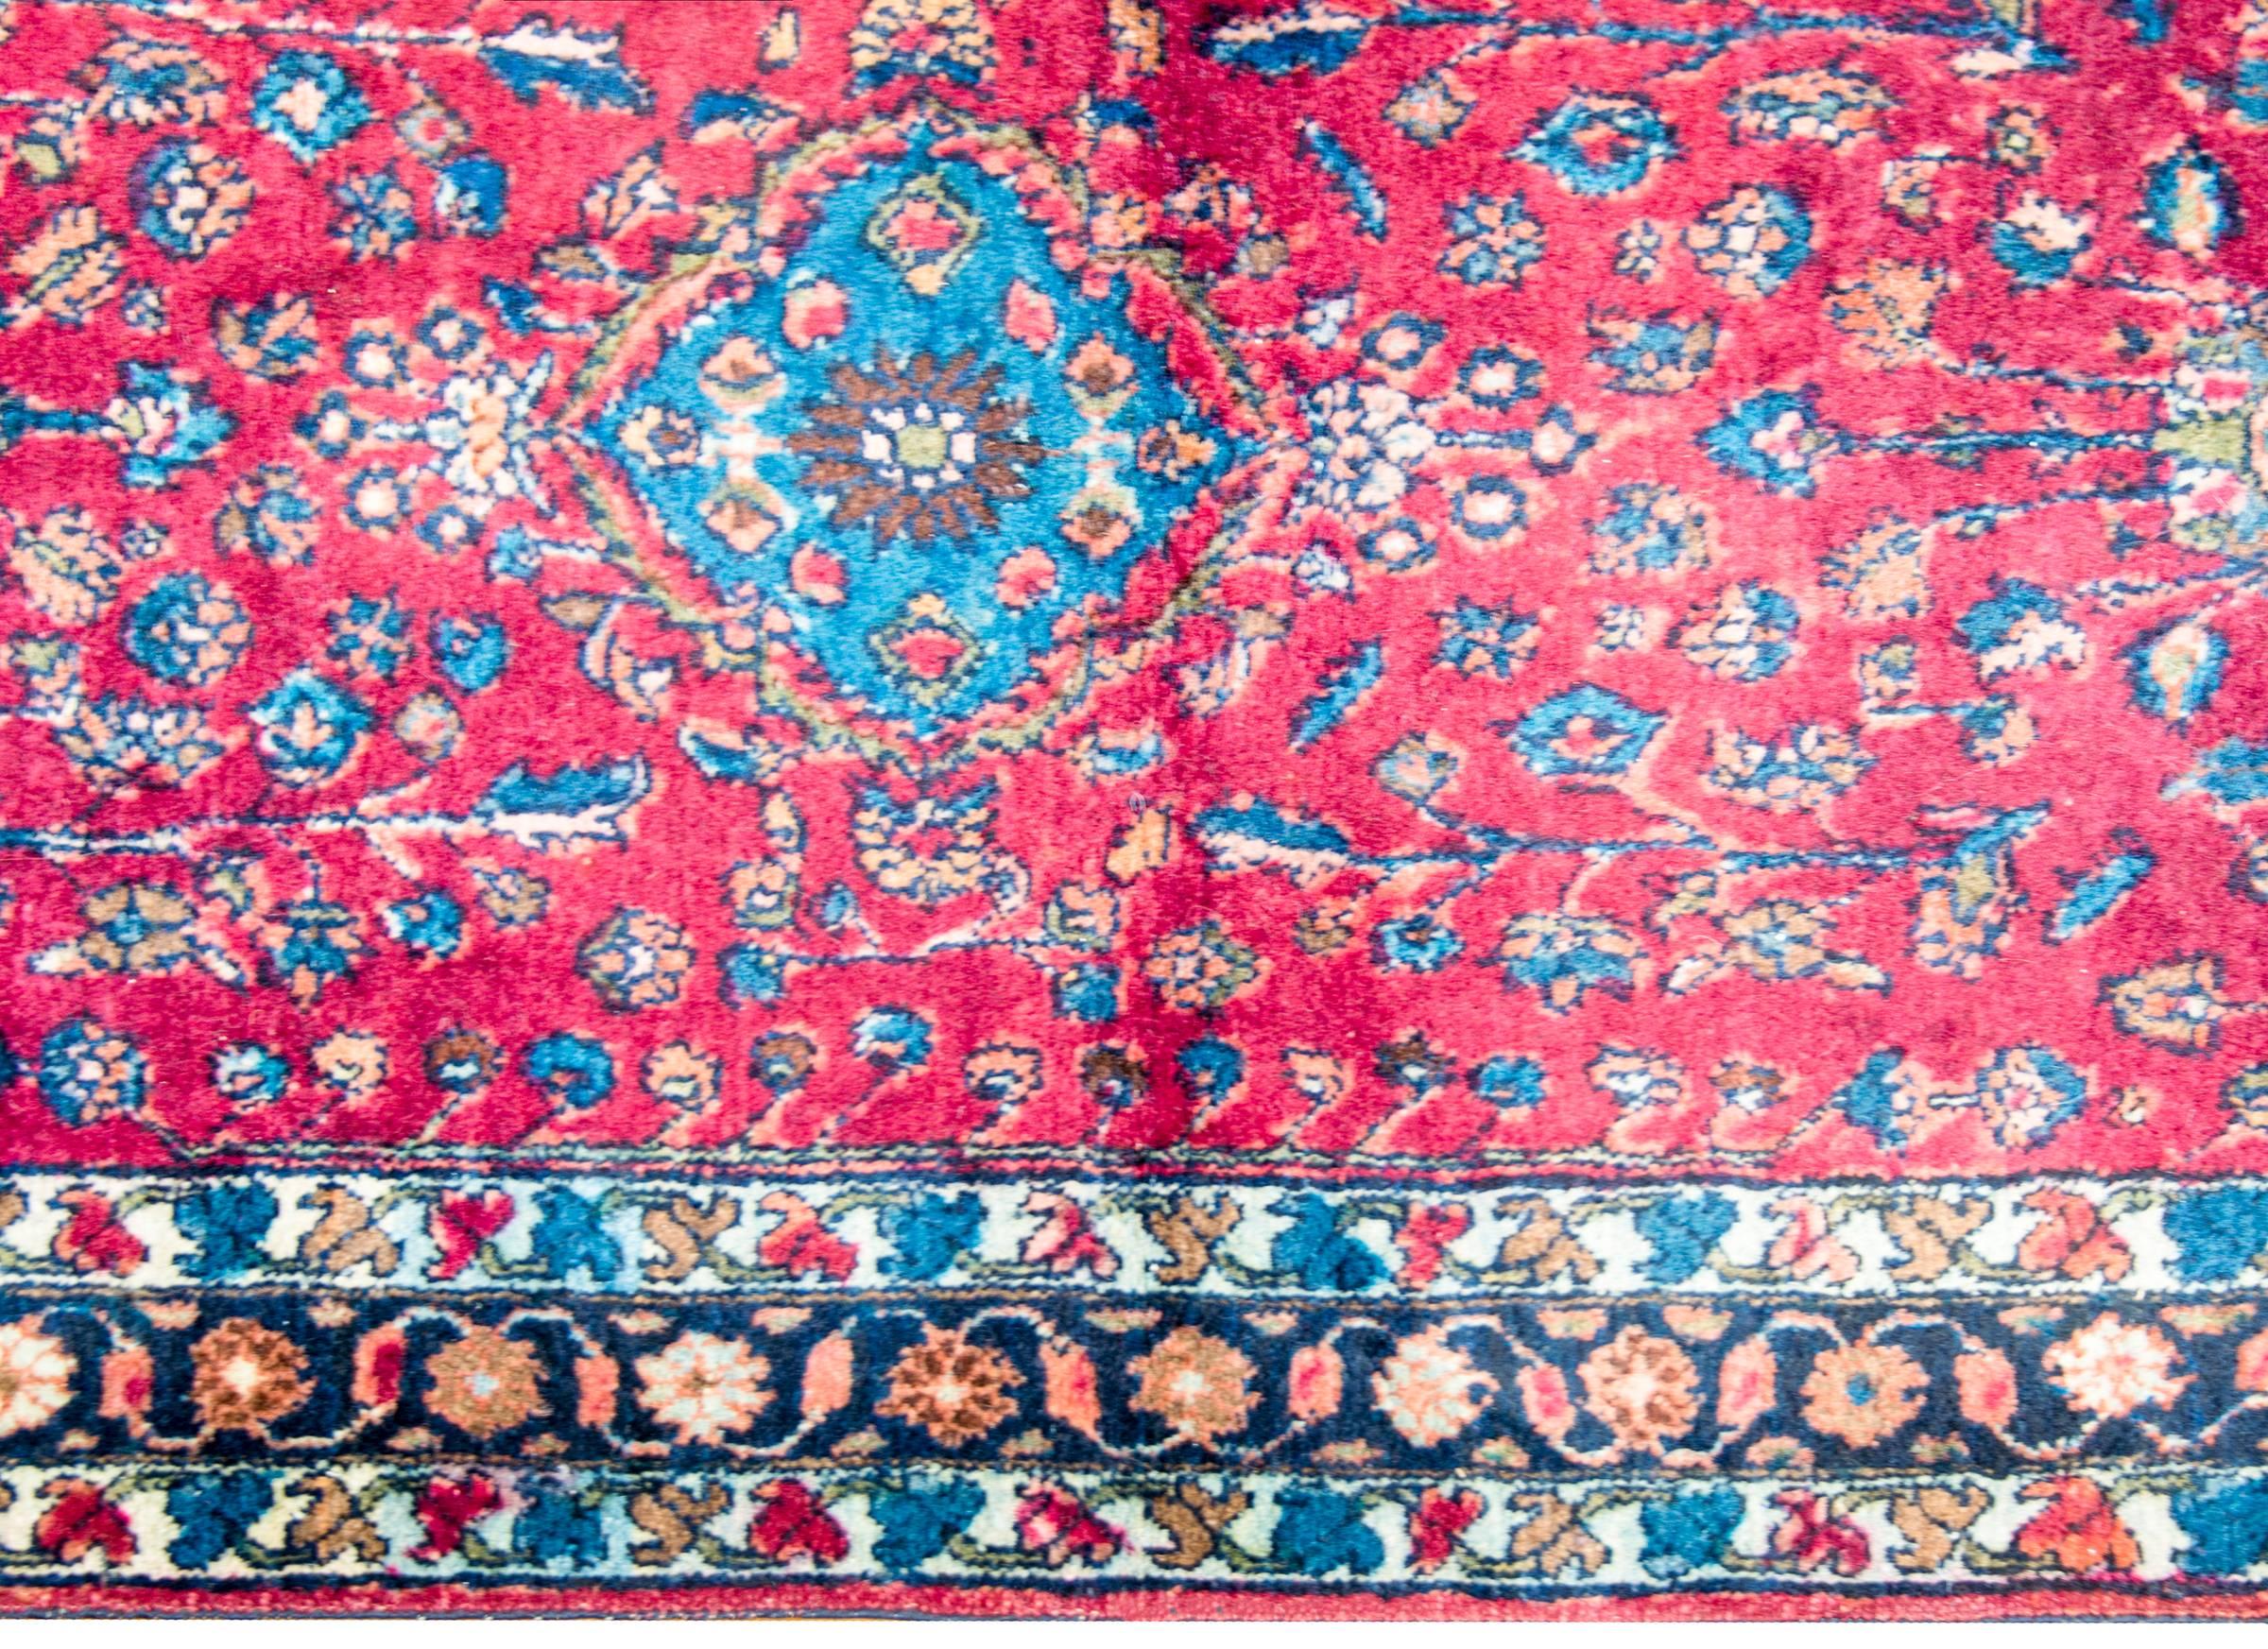 Vegetable Dyed Wonderful Early 20th Century Antique Lilihan Rug For Sale